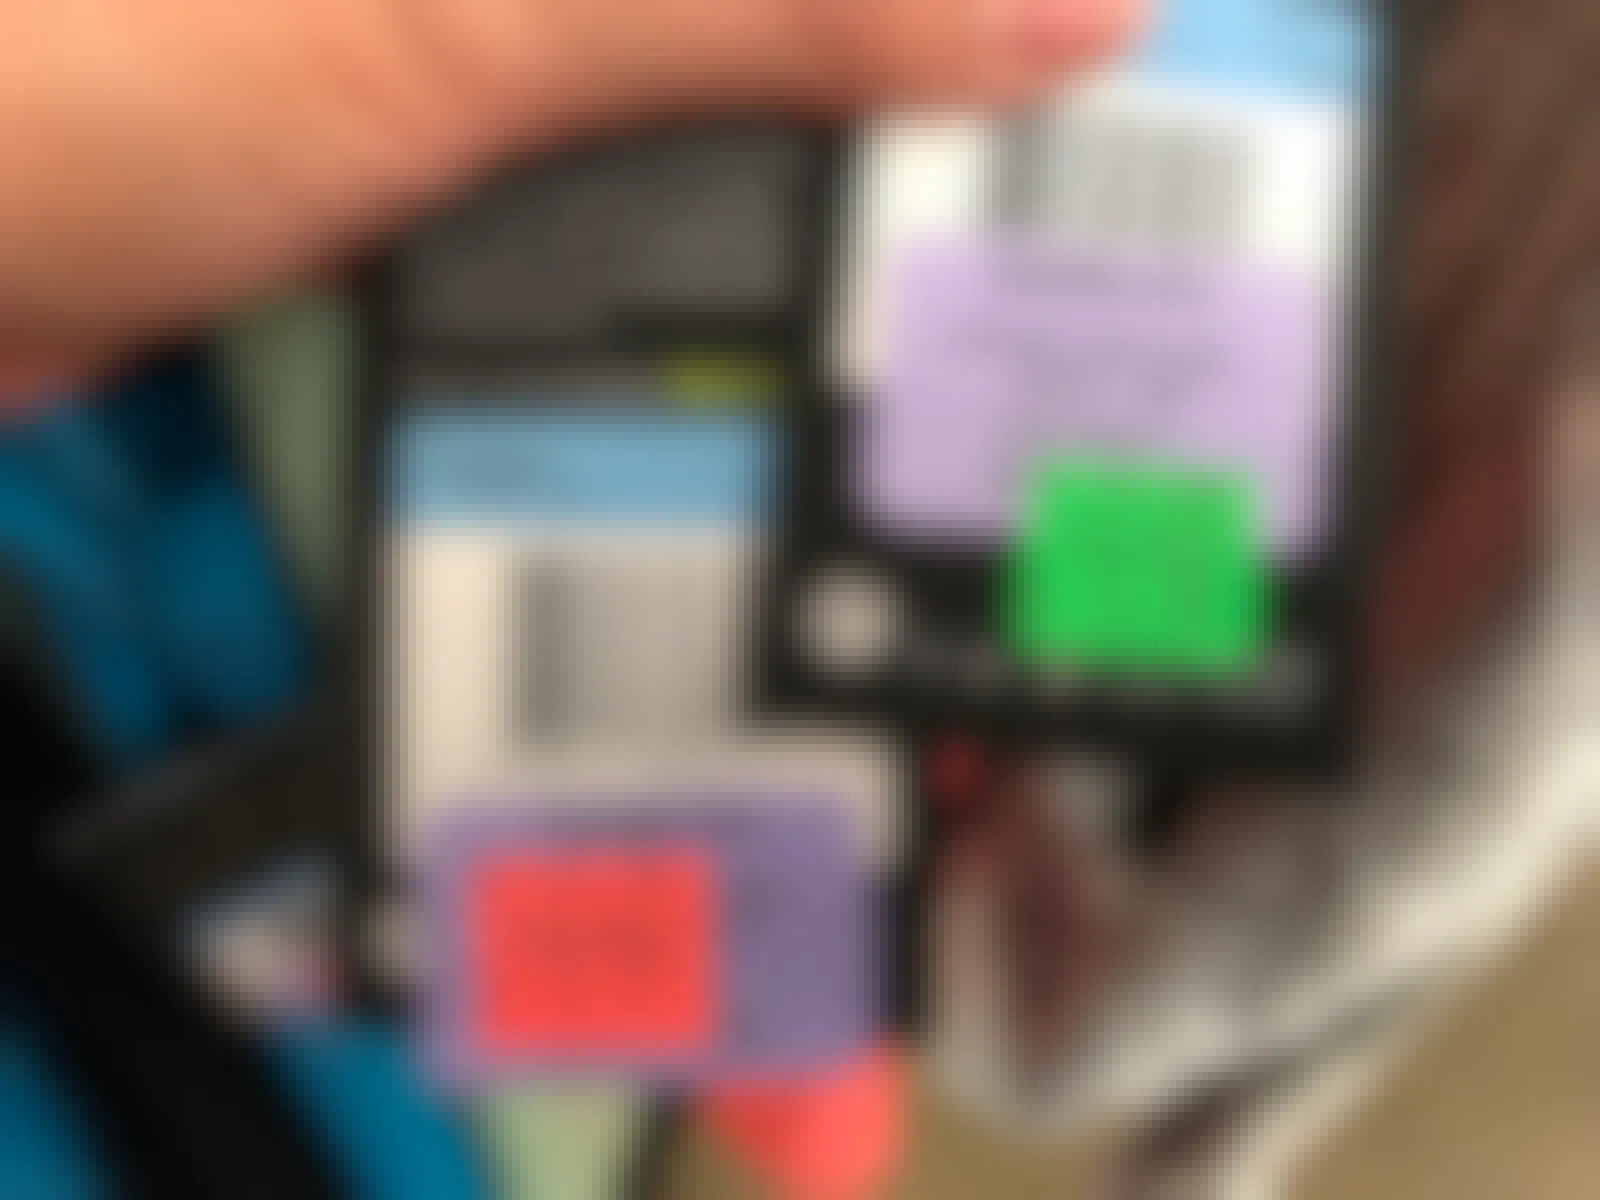 Two Nike tags being held up to show the prices, one with a red clearance sticker, and one with a green clearance sticker.